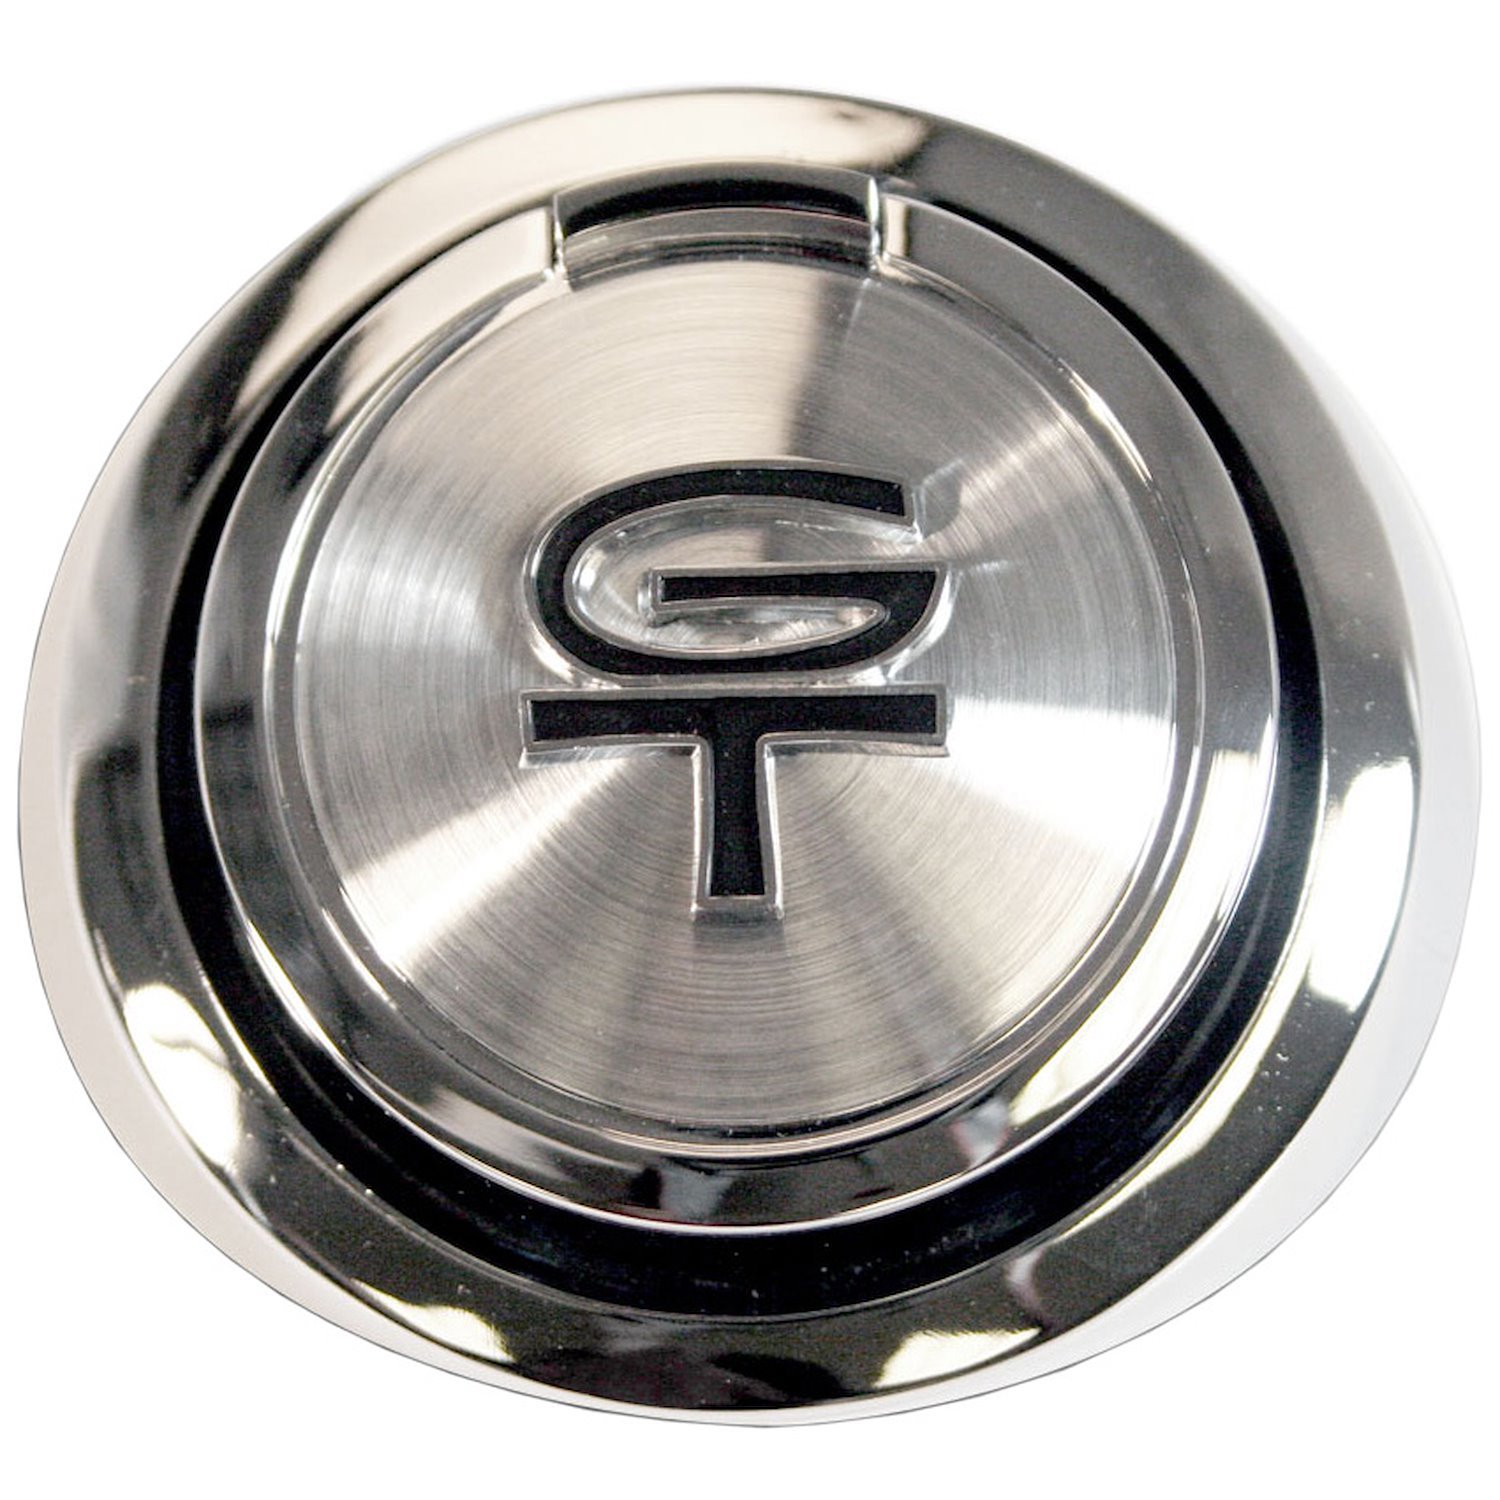 Fuel Cap 1967 Ford Mustang